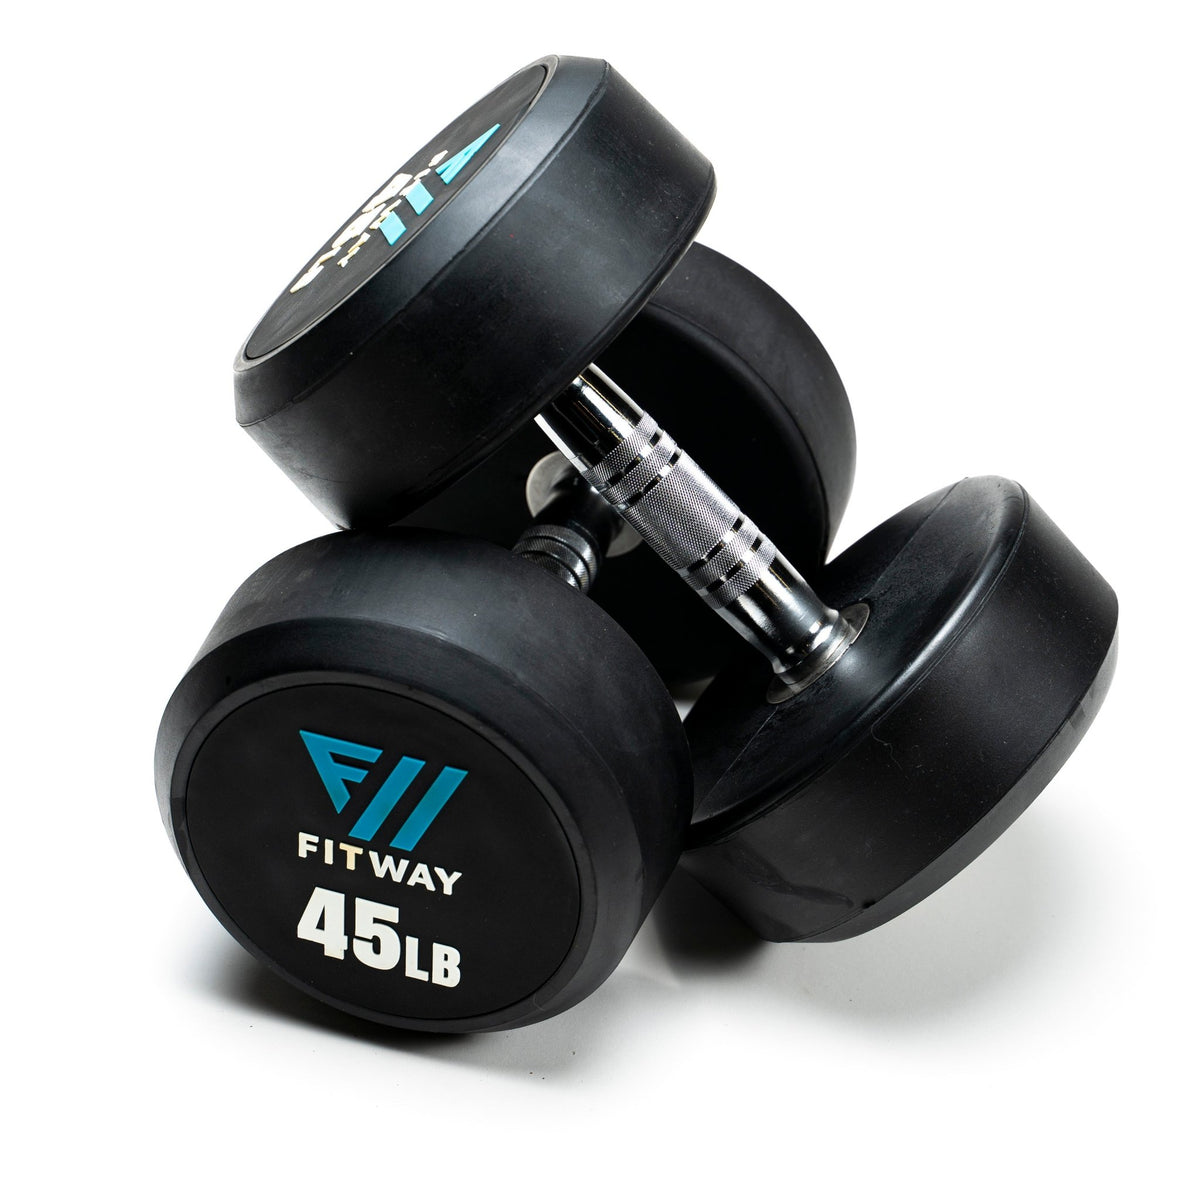 FitWay Equip. Commercial Rubber Dumbbell Set, 5lb - 50lb - Fitness Experience